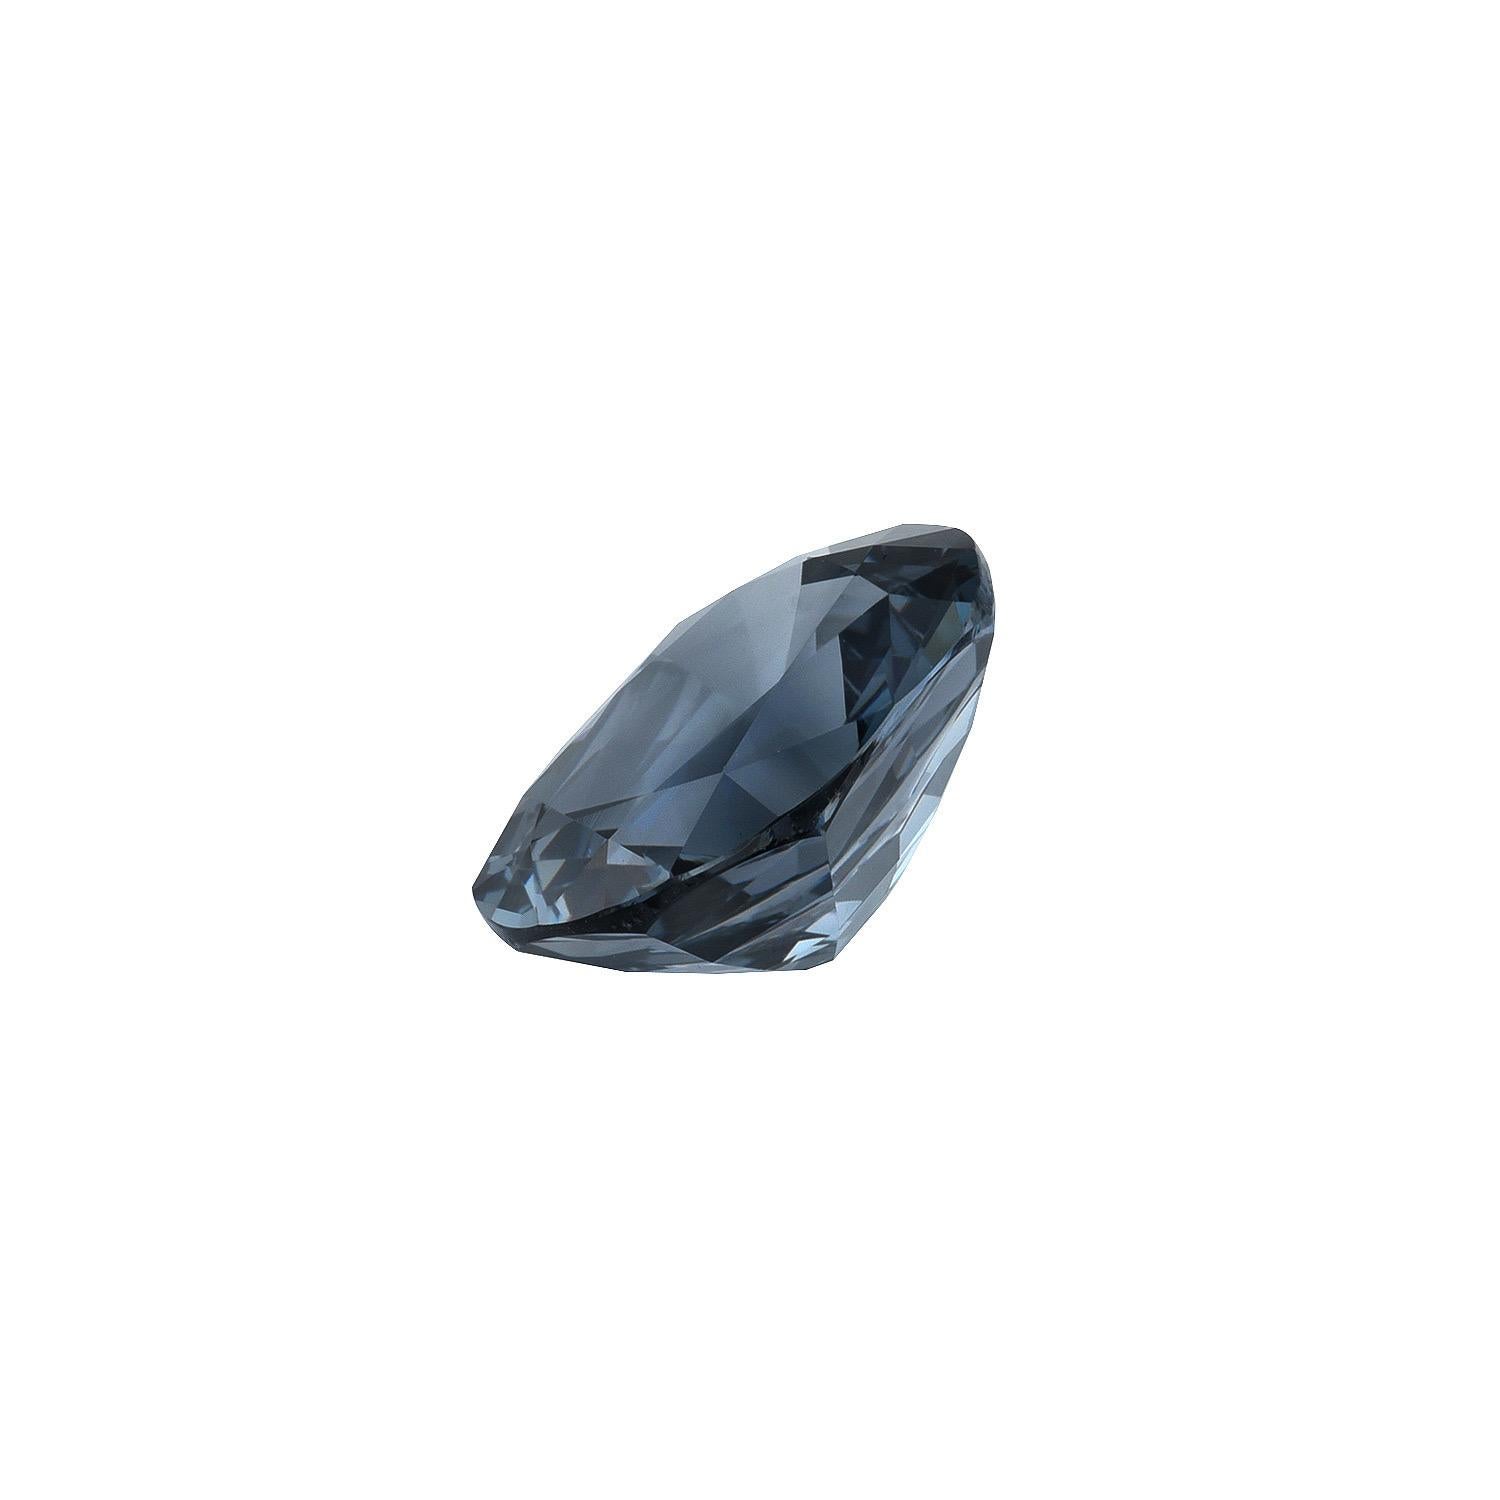 3.62 carat Blue-Grey Spinel oval loose gemstone, offered unmounted to a gemstone connoisseur.
Dimensions: 11.9 x 8.6 mm.
Returns are accepted and paid by us within 7 days of delivery.
We offer supreme custom jewelry work upon request. Please contact